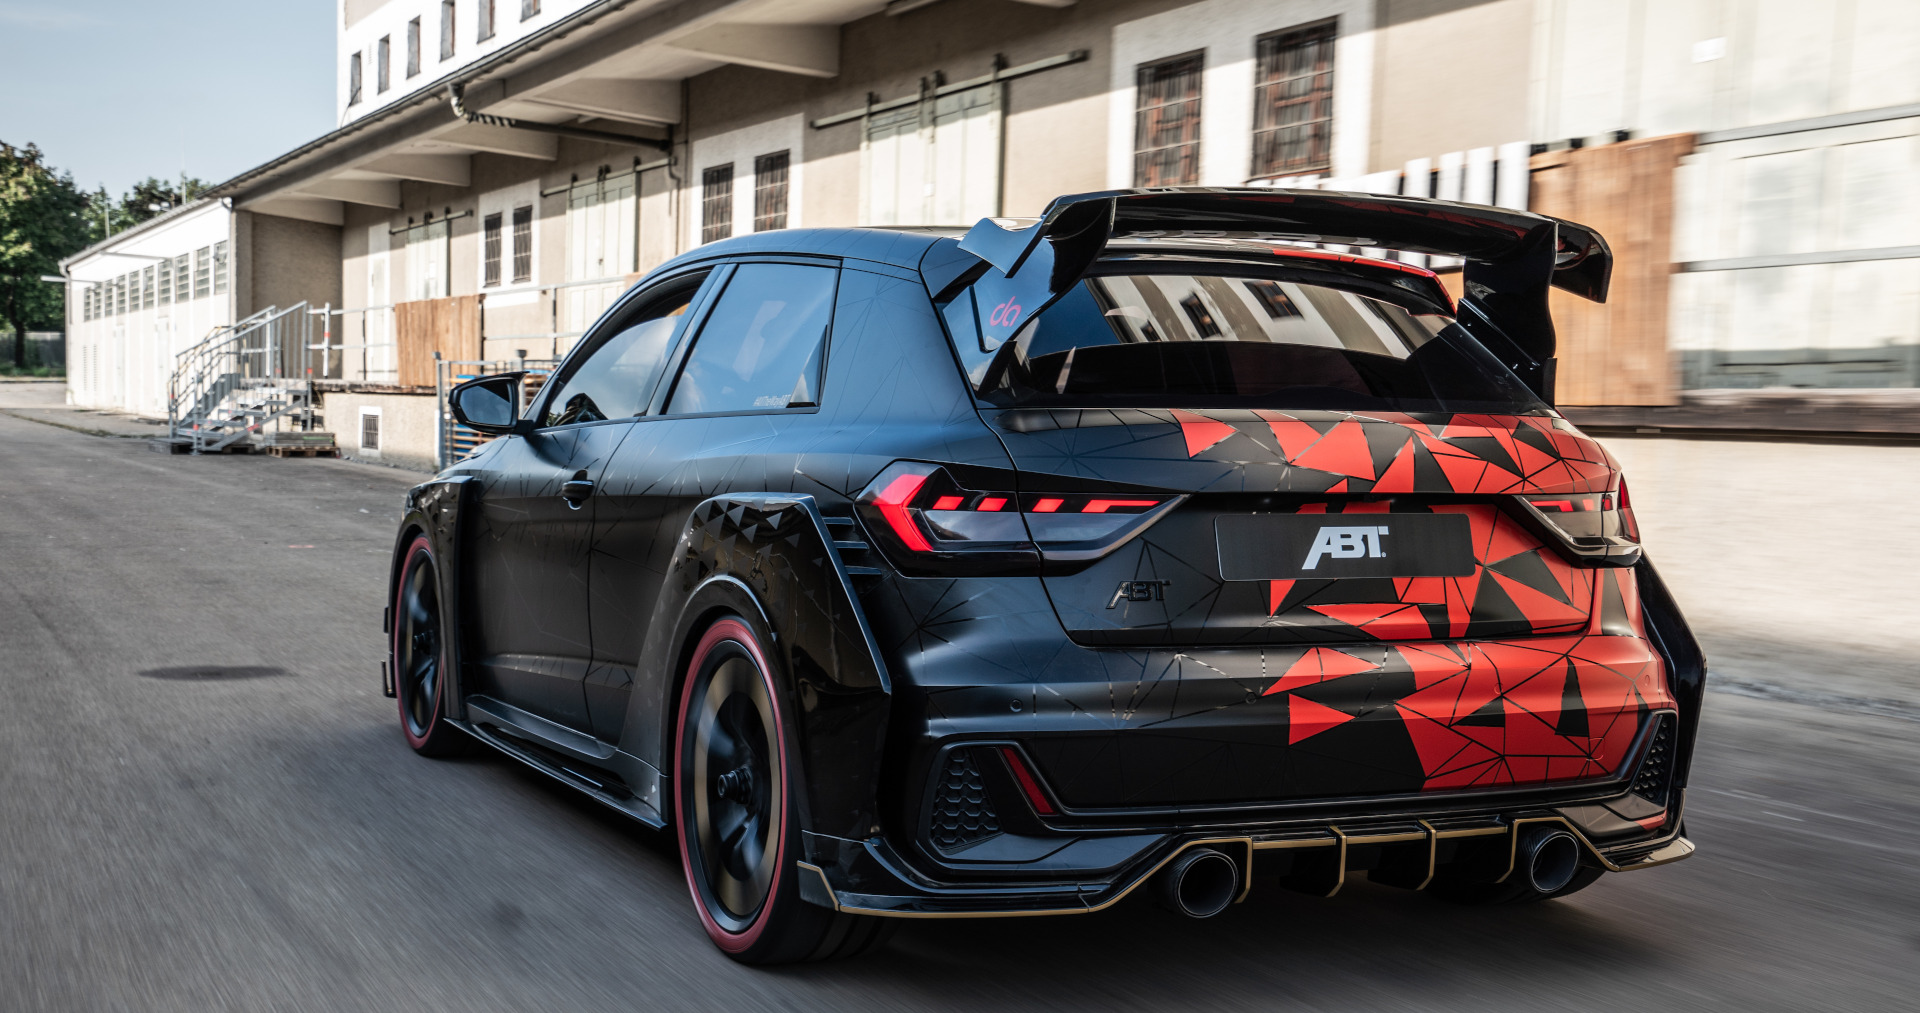 A1 1of1 - Audi Tuning, VW Tuning, Chiptuning von ABT Sportsline.